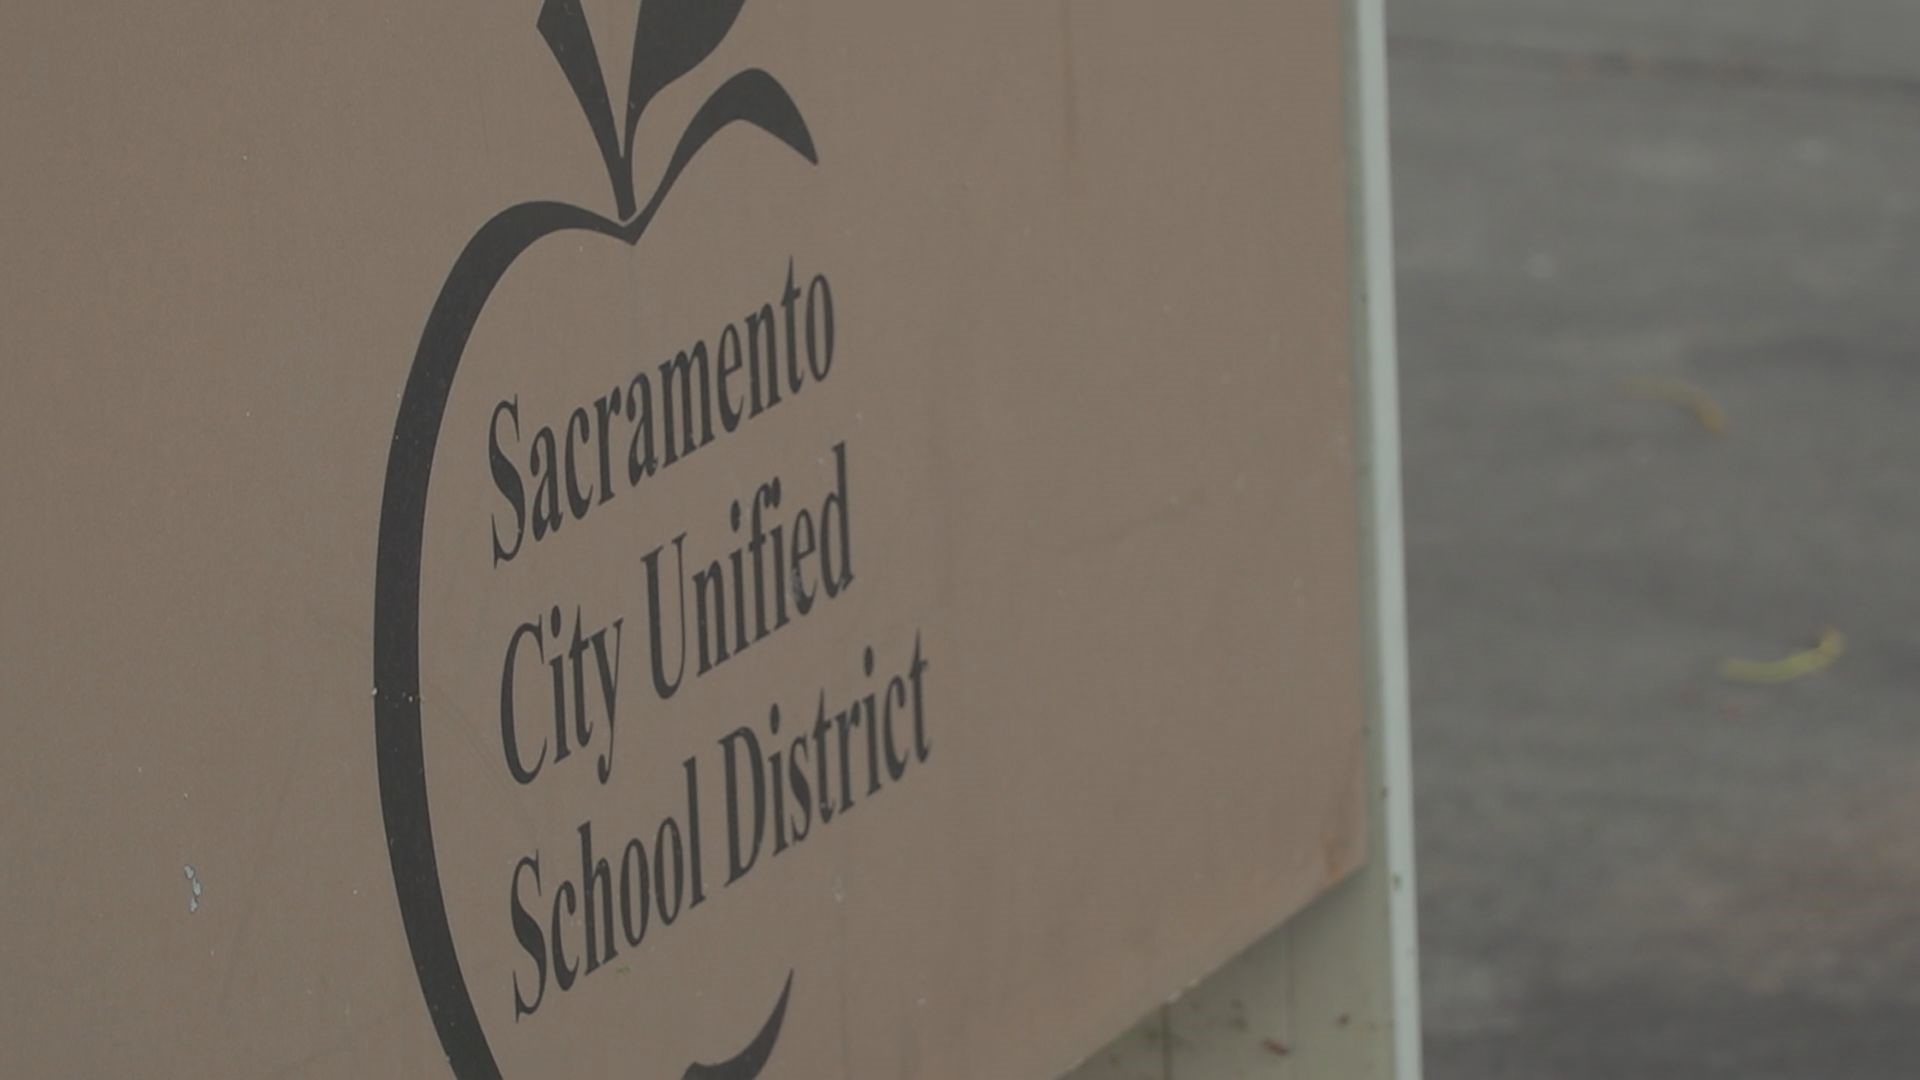 Students sixth through 12th grade would be able to return May 6 if Sacramento County returns to the red tier. The district's last day is on June 17.